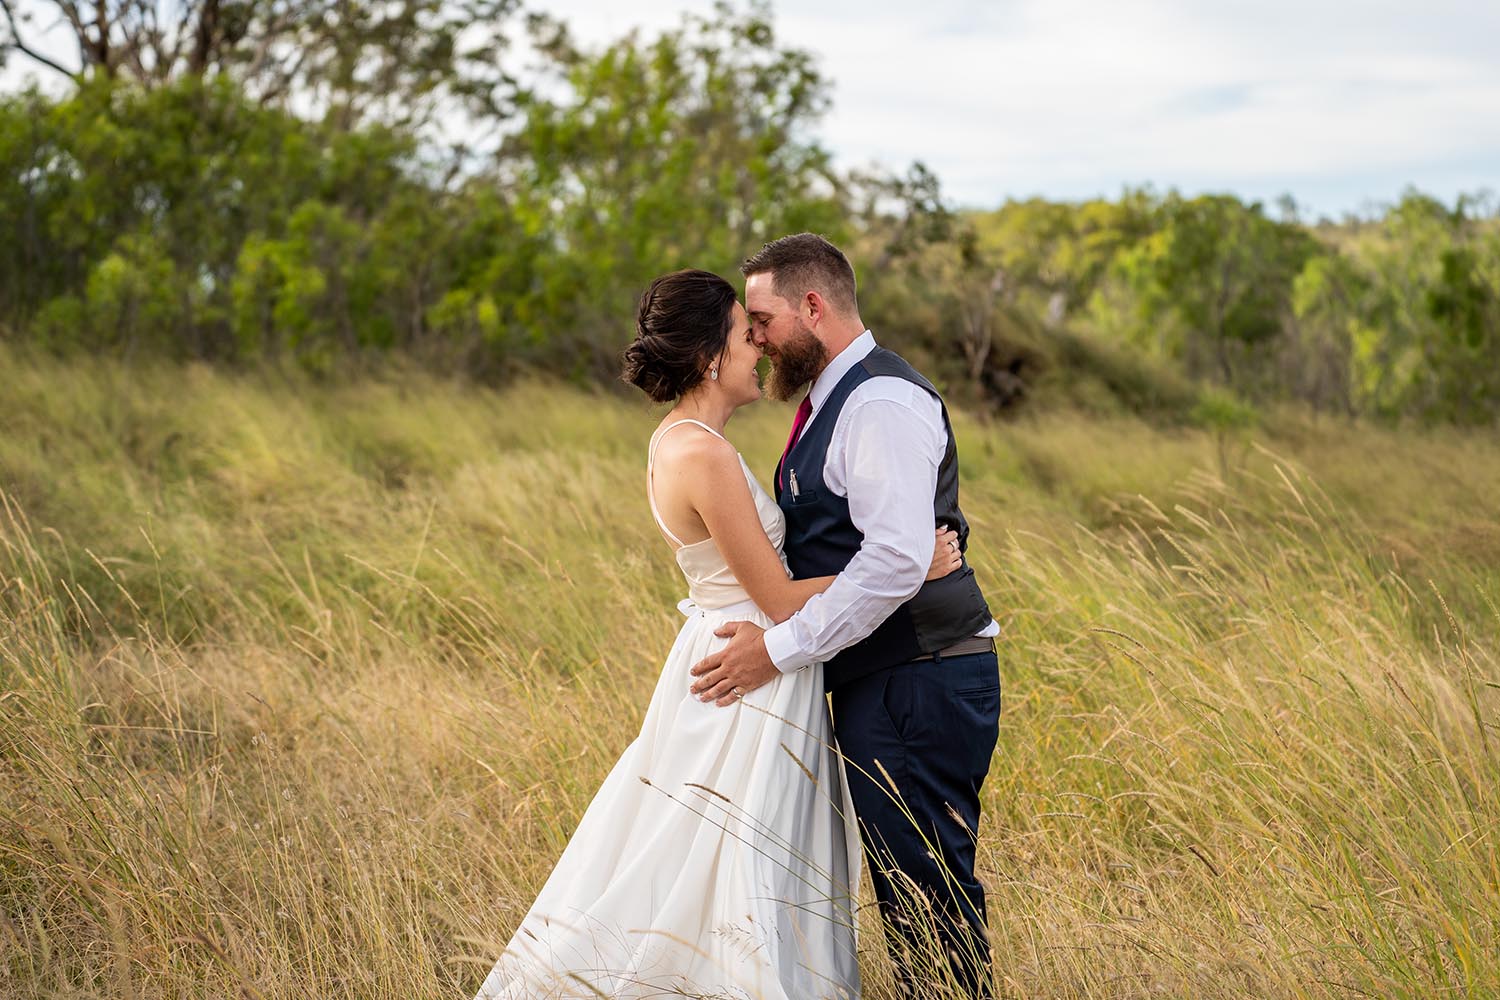 Wedding Photography - couple embracing in field